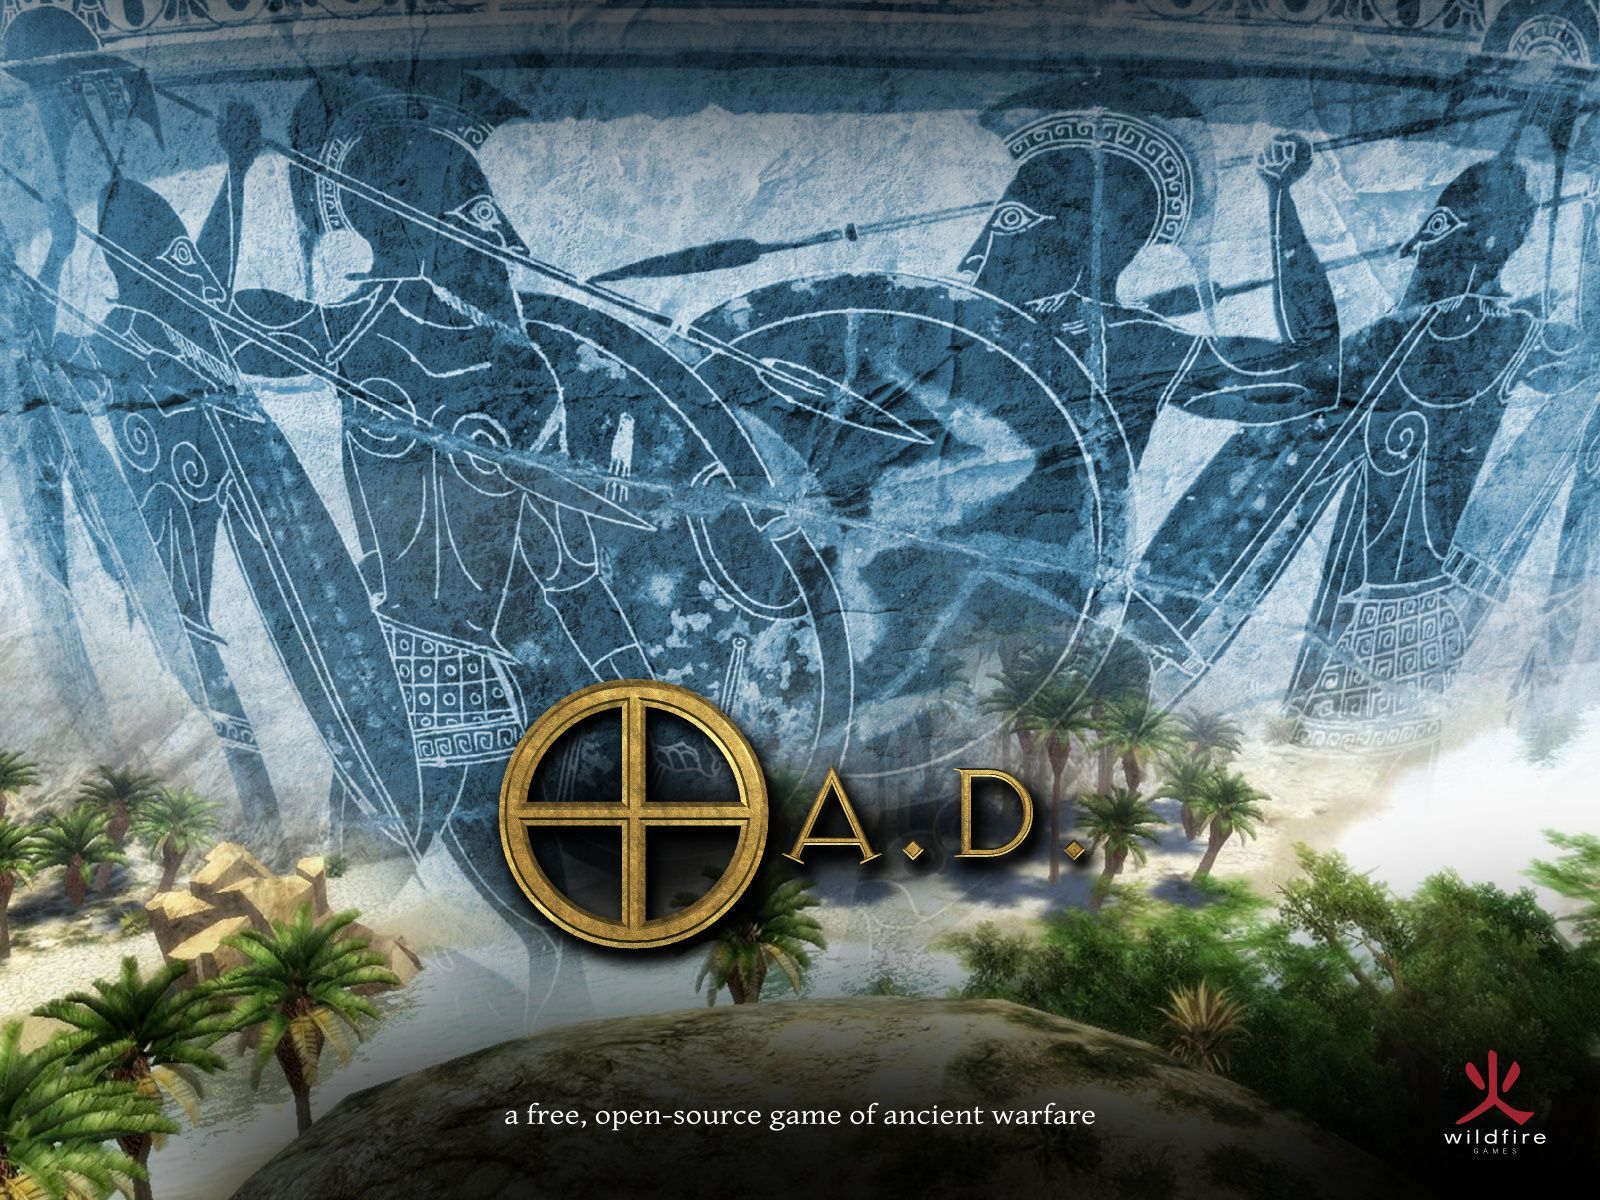 Wallpaper Featuring The Greek Civilization - 0 Ad Cover , HD Wallpaper & Backgrounds